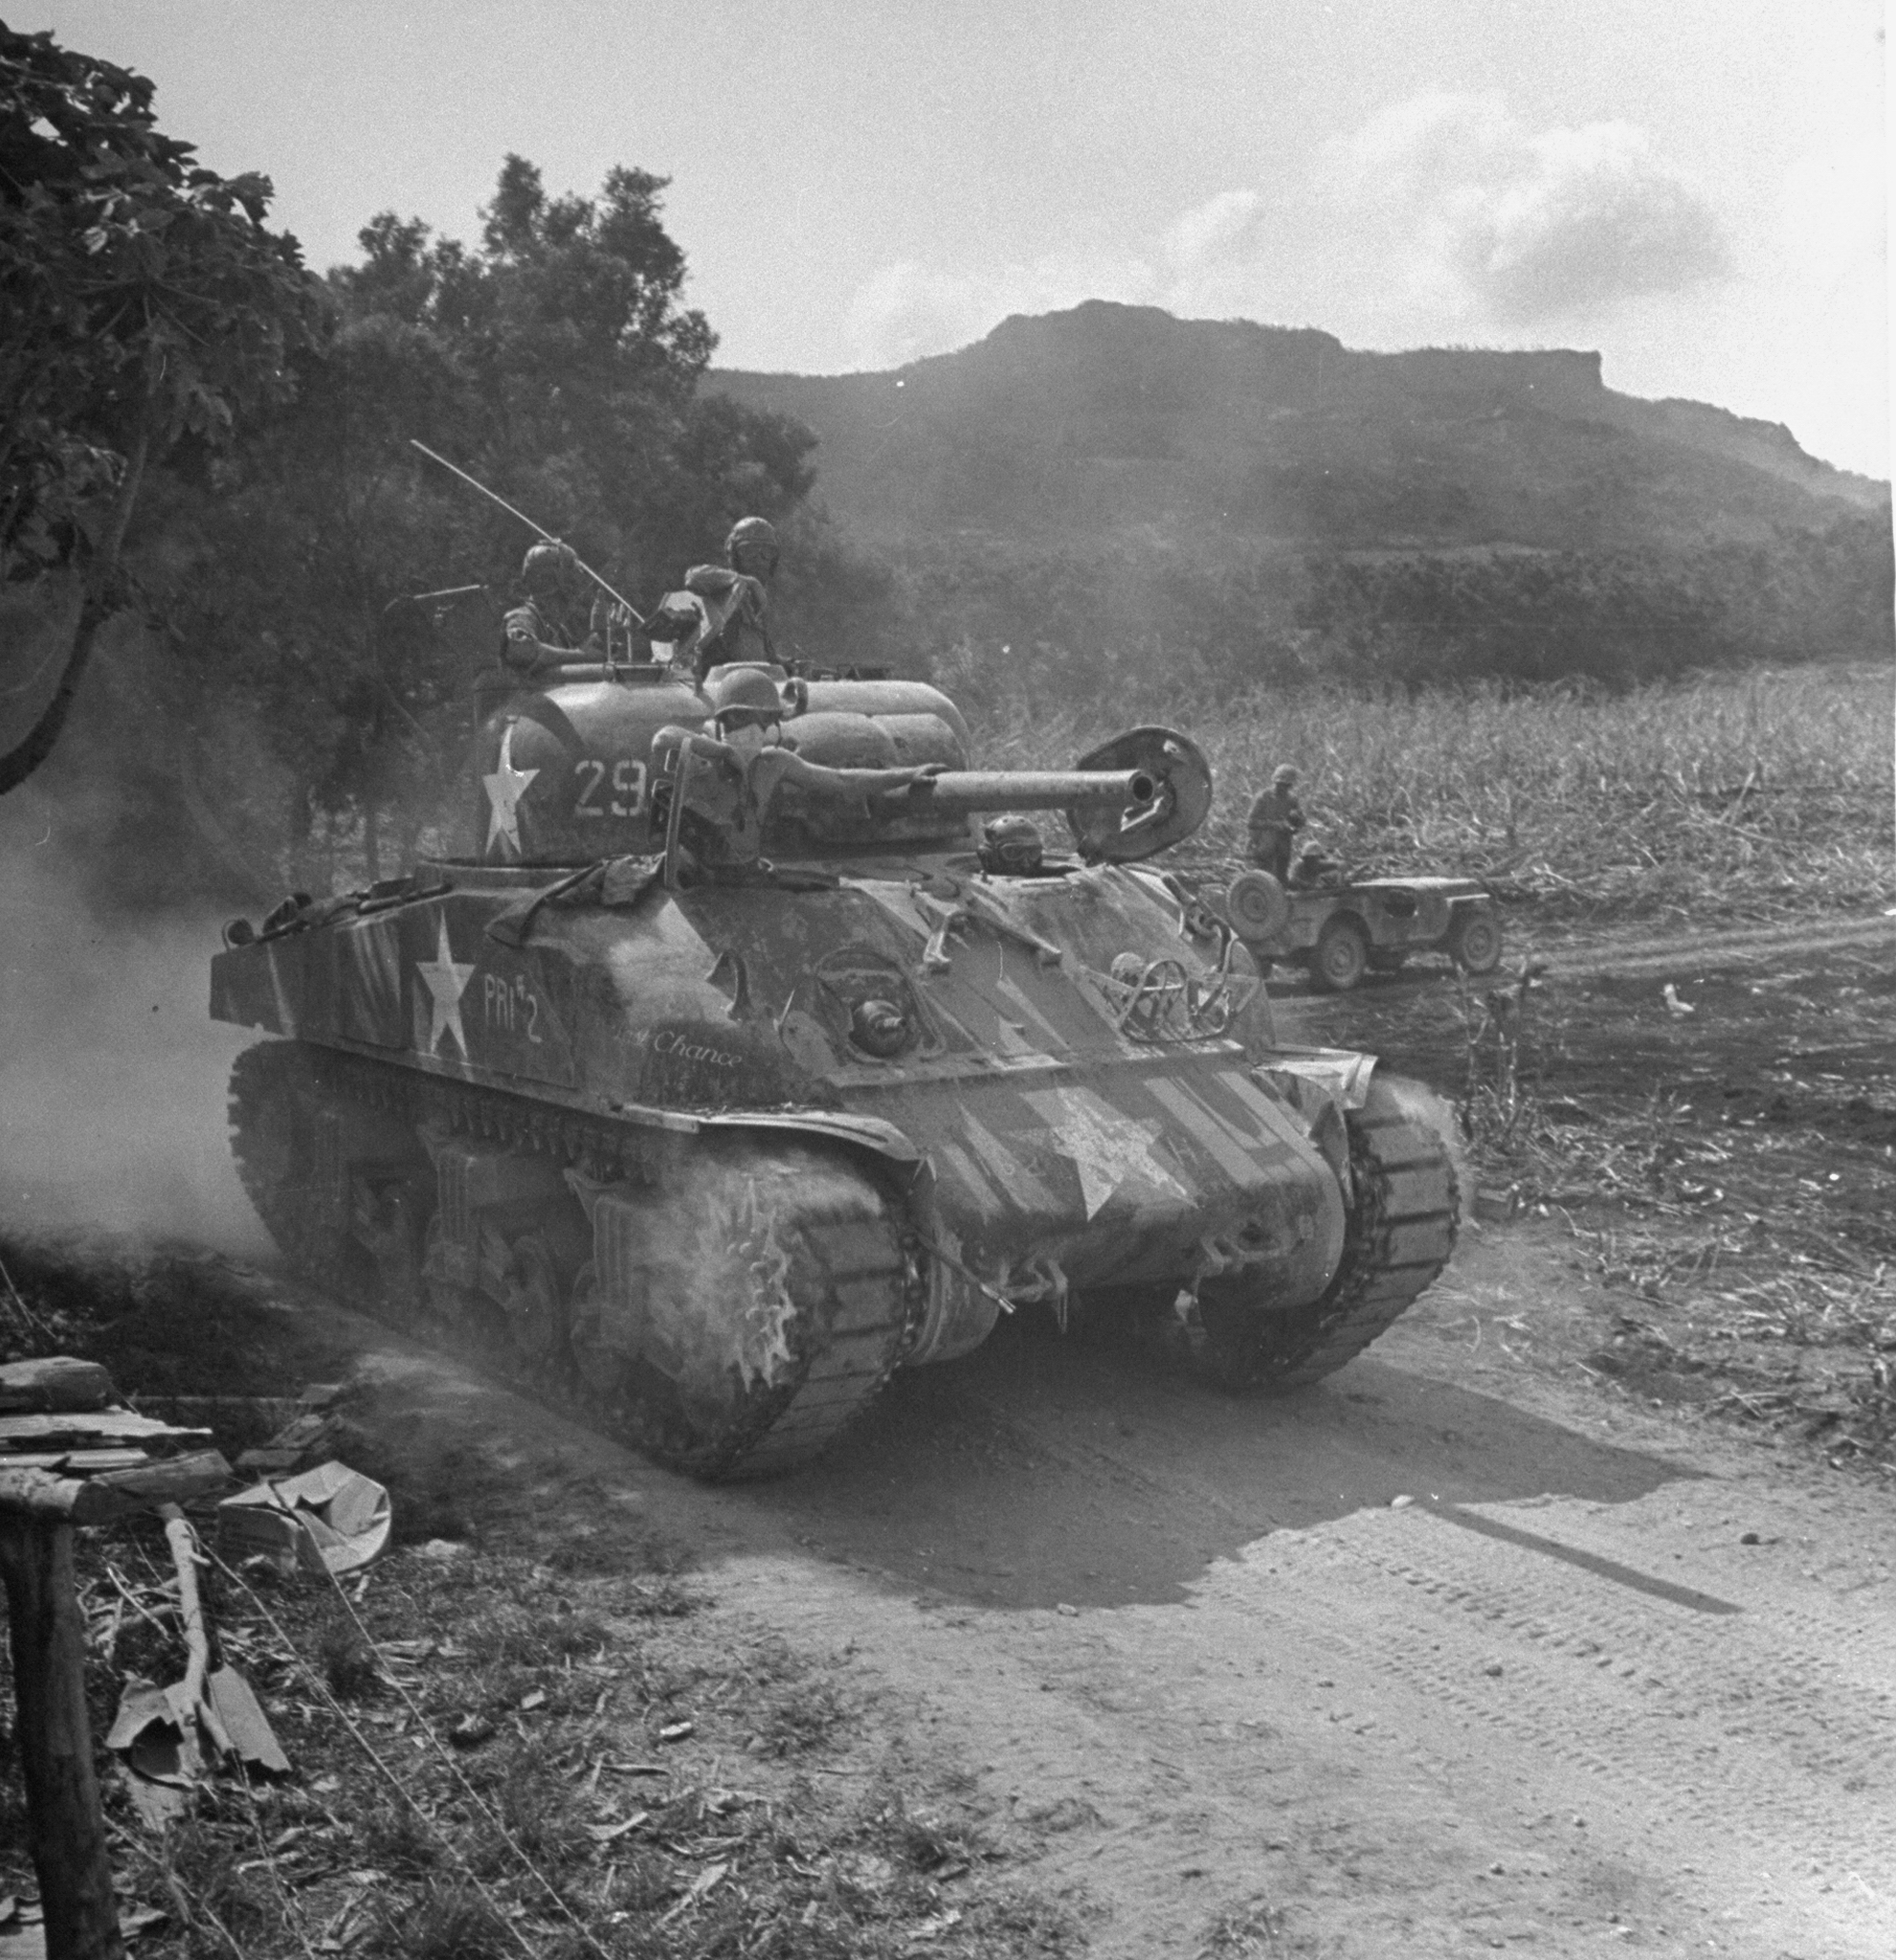 American M4 Sherman tank in action during the invasion of Saipan, 1944.